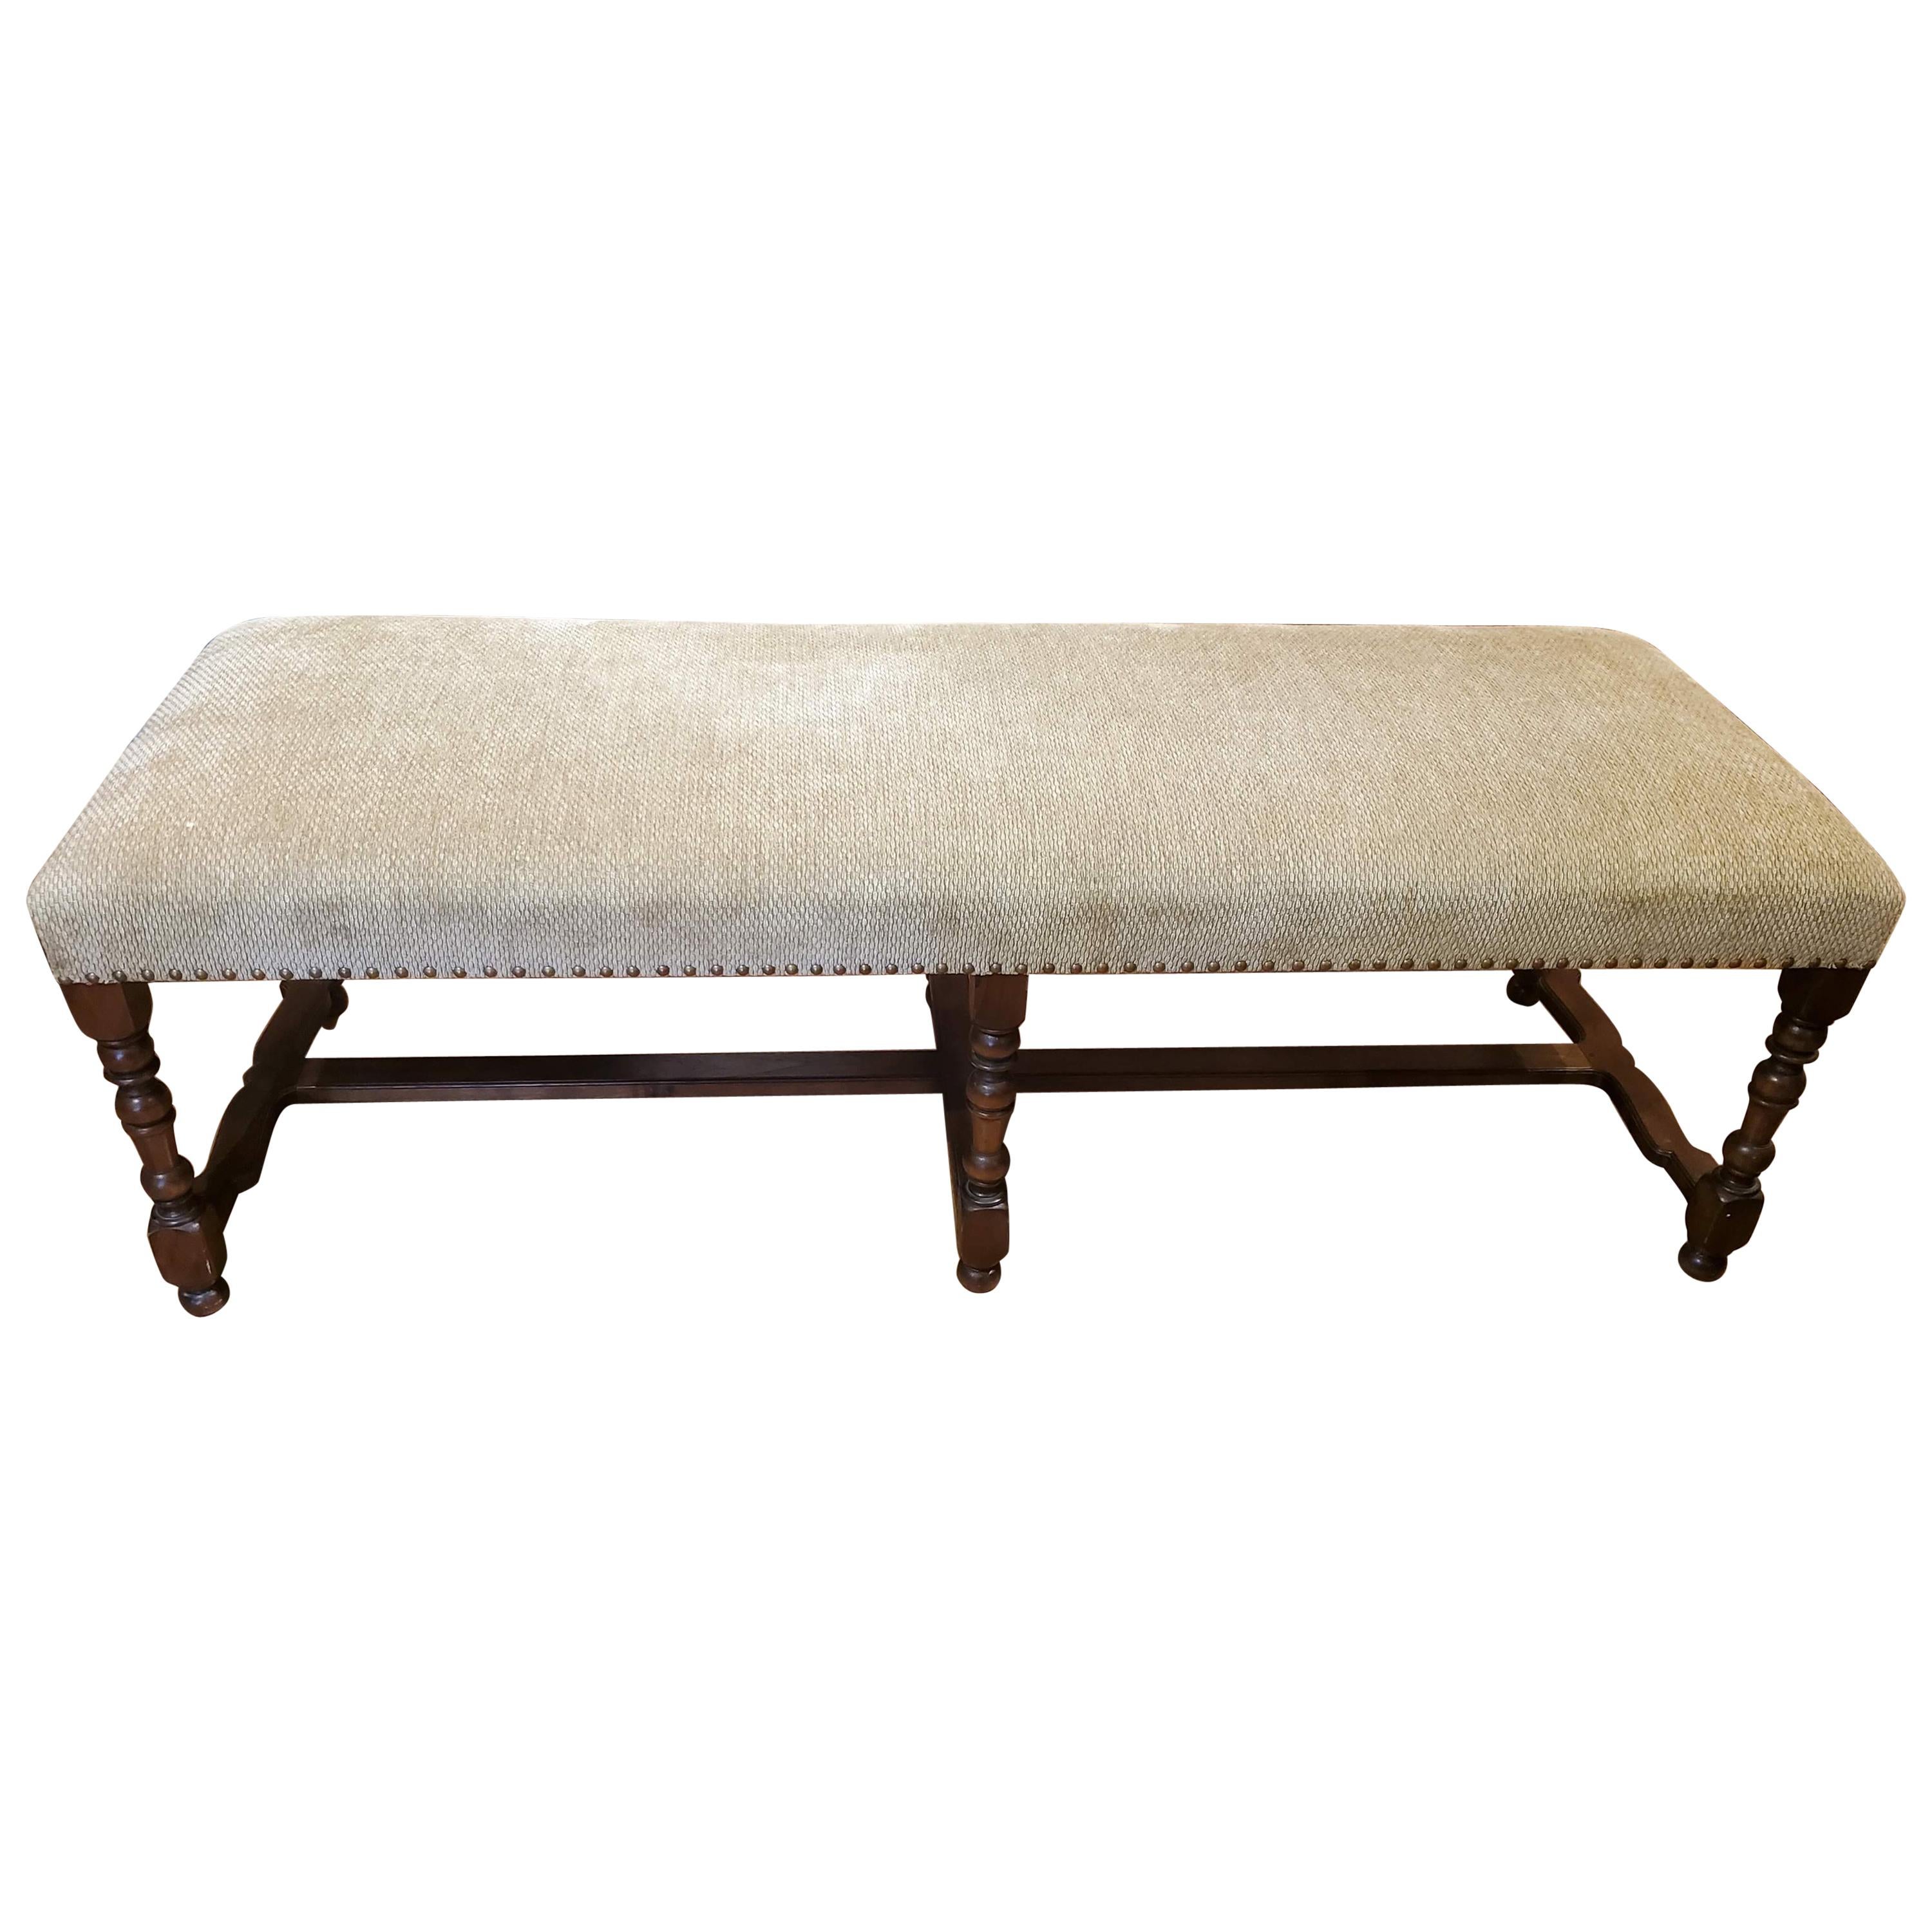 Louis XIV Style French Provincial Long Tan Upholstered Walnut Bench